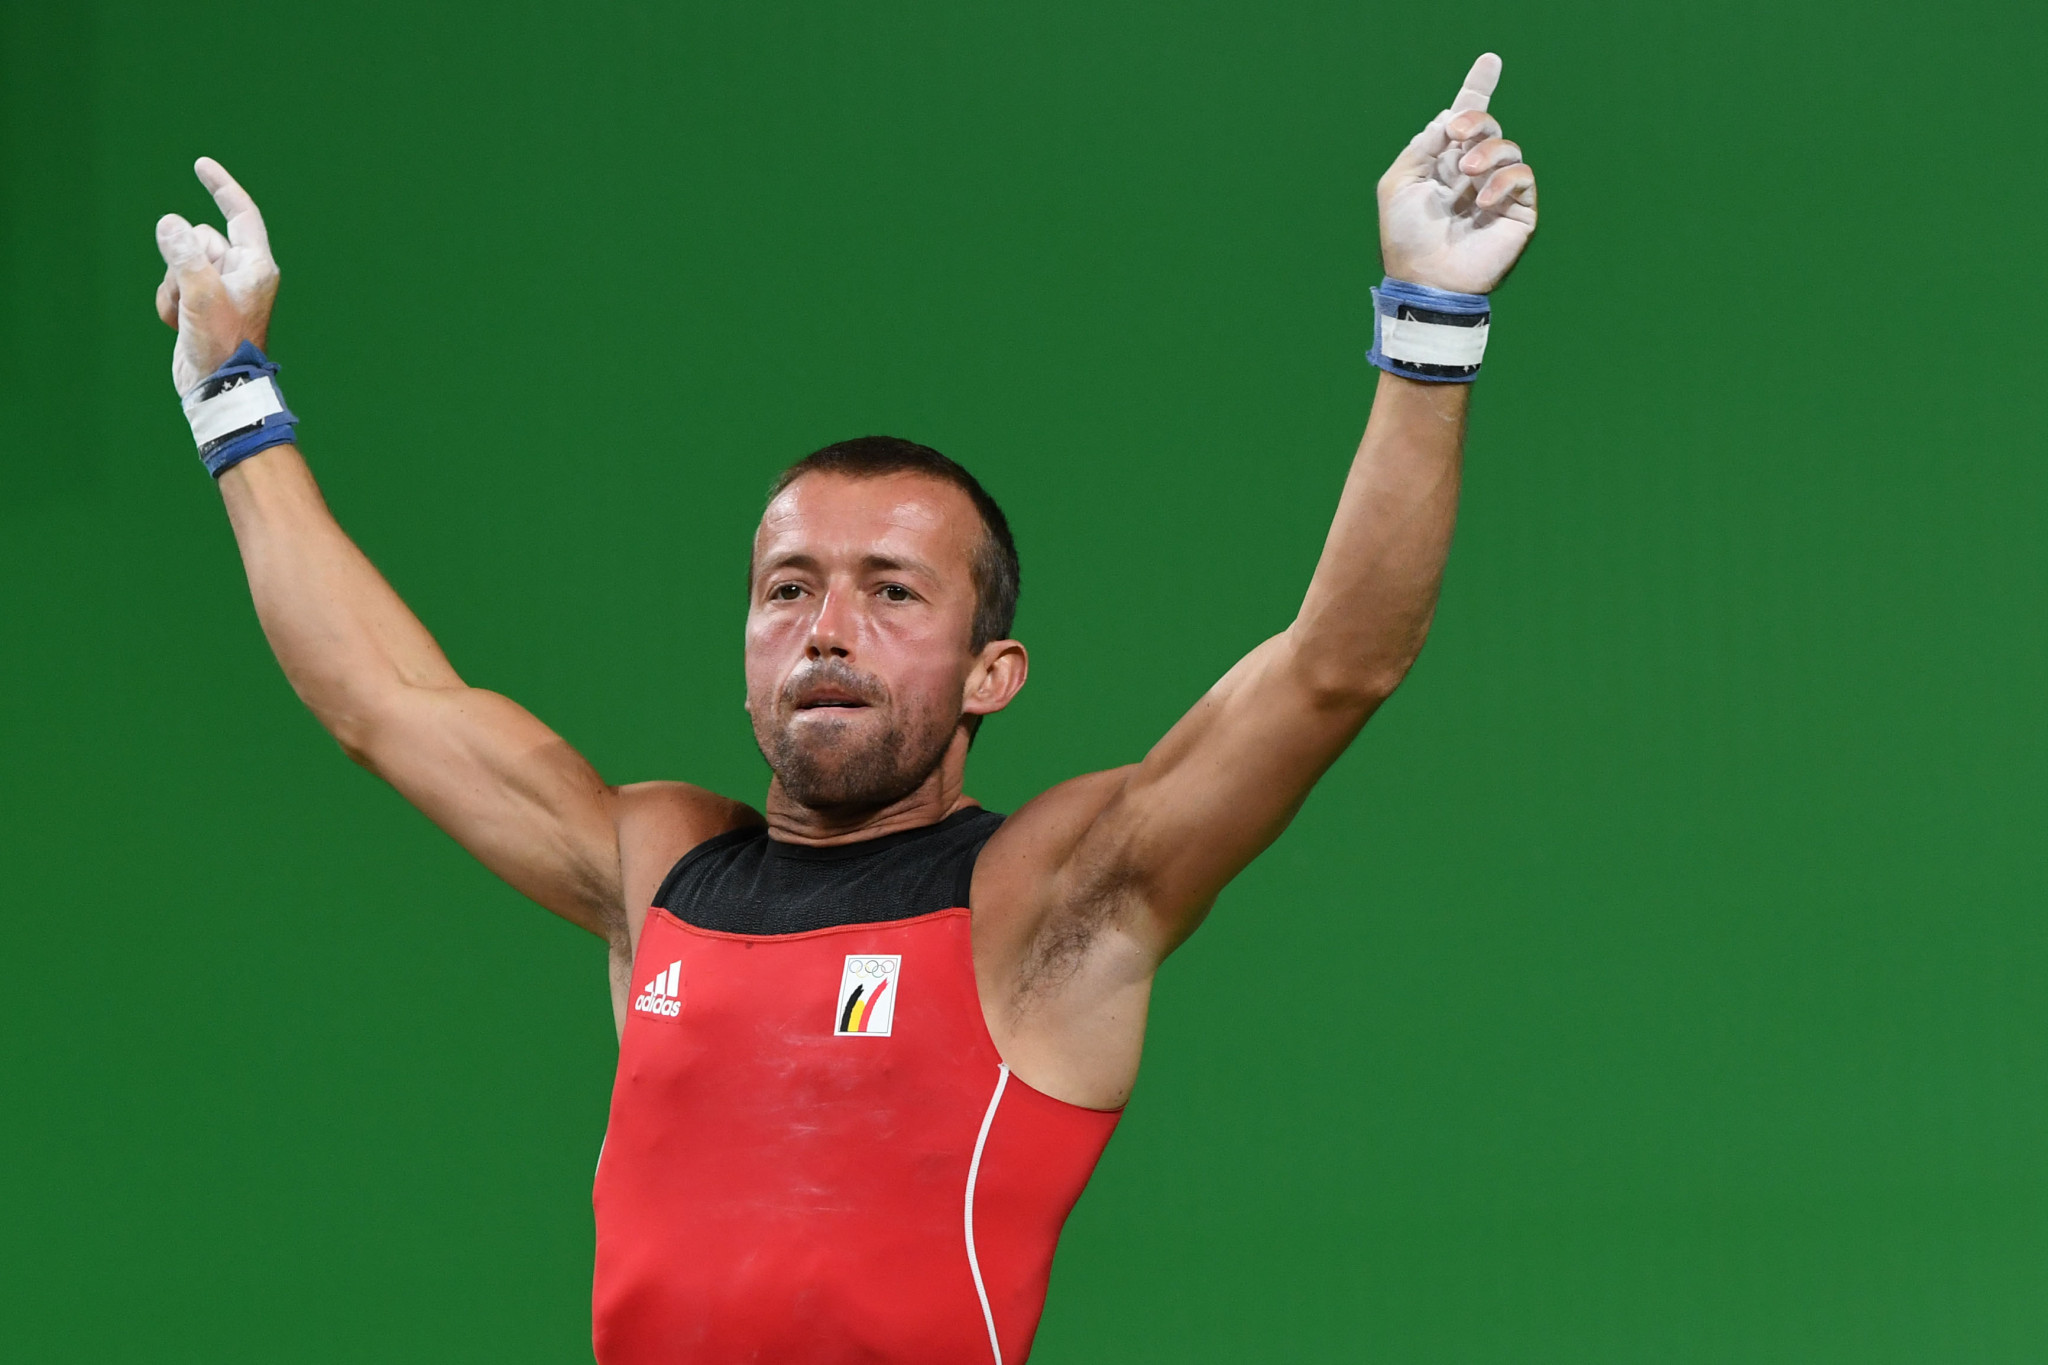 Tom Goegebuer, now President of the Belgian Weightlifting Federation, rejected a suggestion that he had anything to do with the new Olympic qualification system, or that it unduly benefited Belgian athletes 